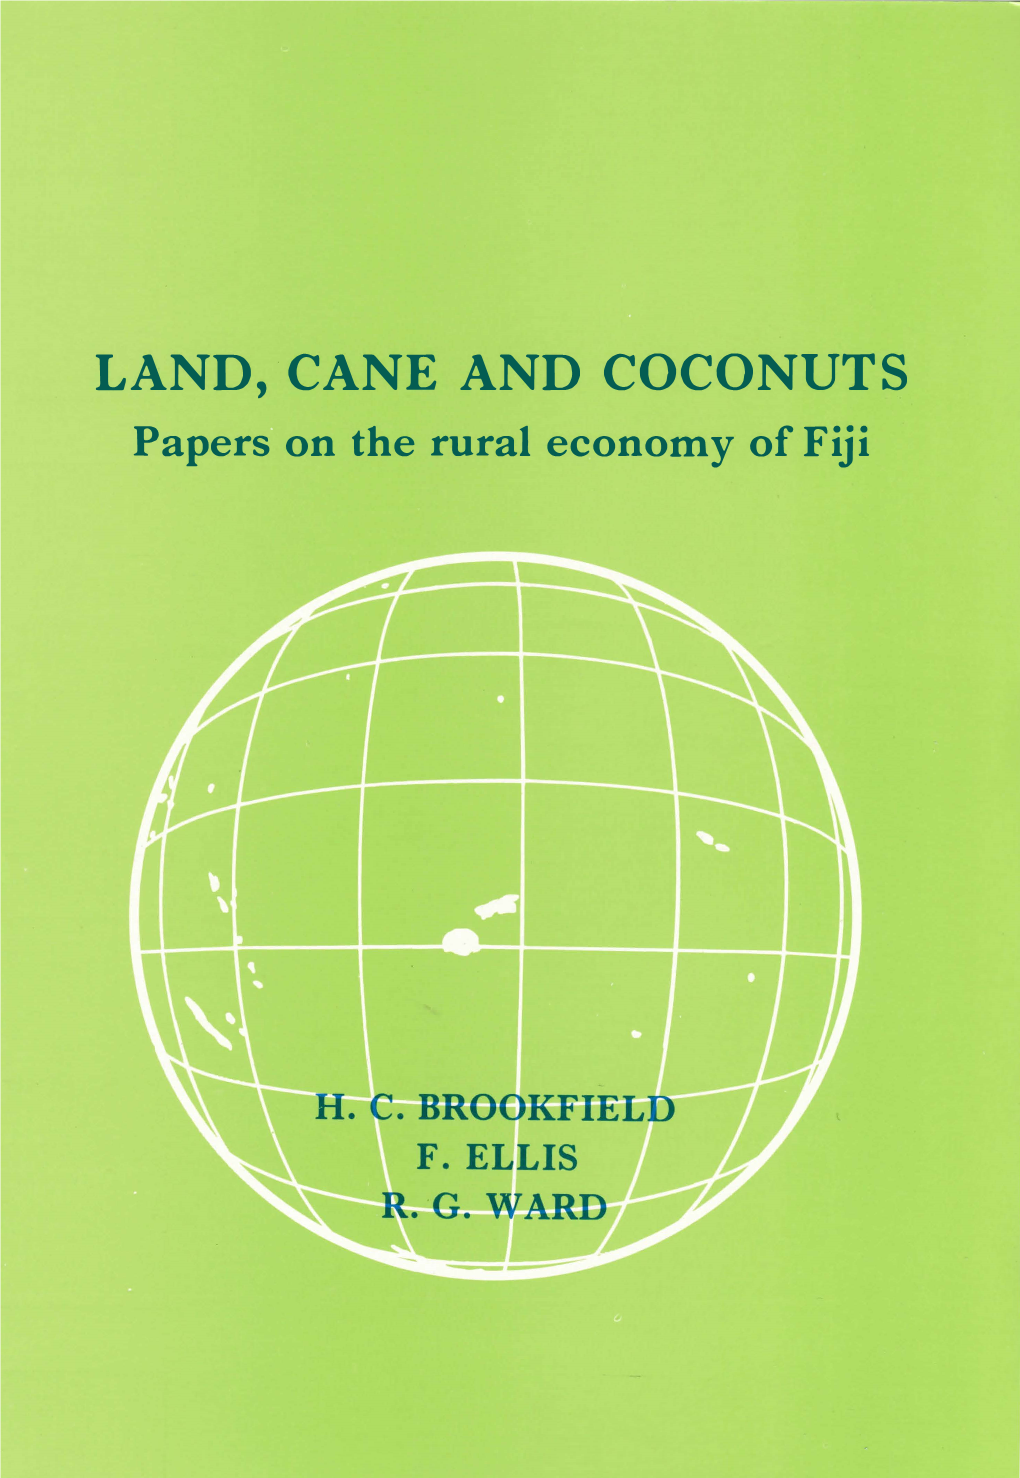 LAND, CANE and COCONUTS Papers· on the Rural Economy of Fiji LAND, CANE and COCONUTS Fiji Papers on the Rural Economy Of